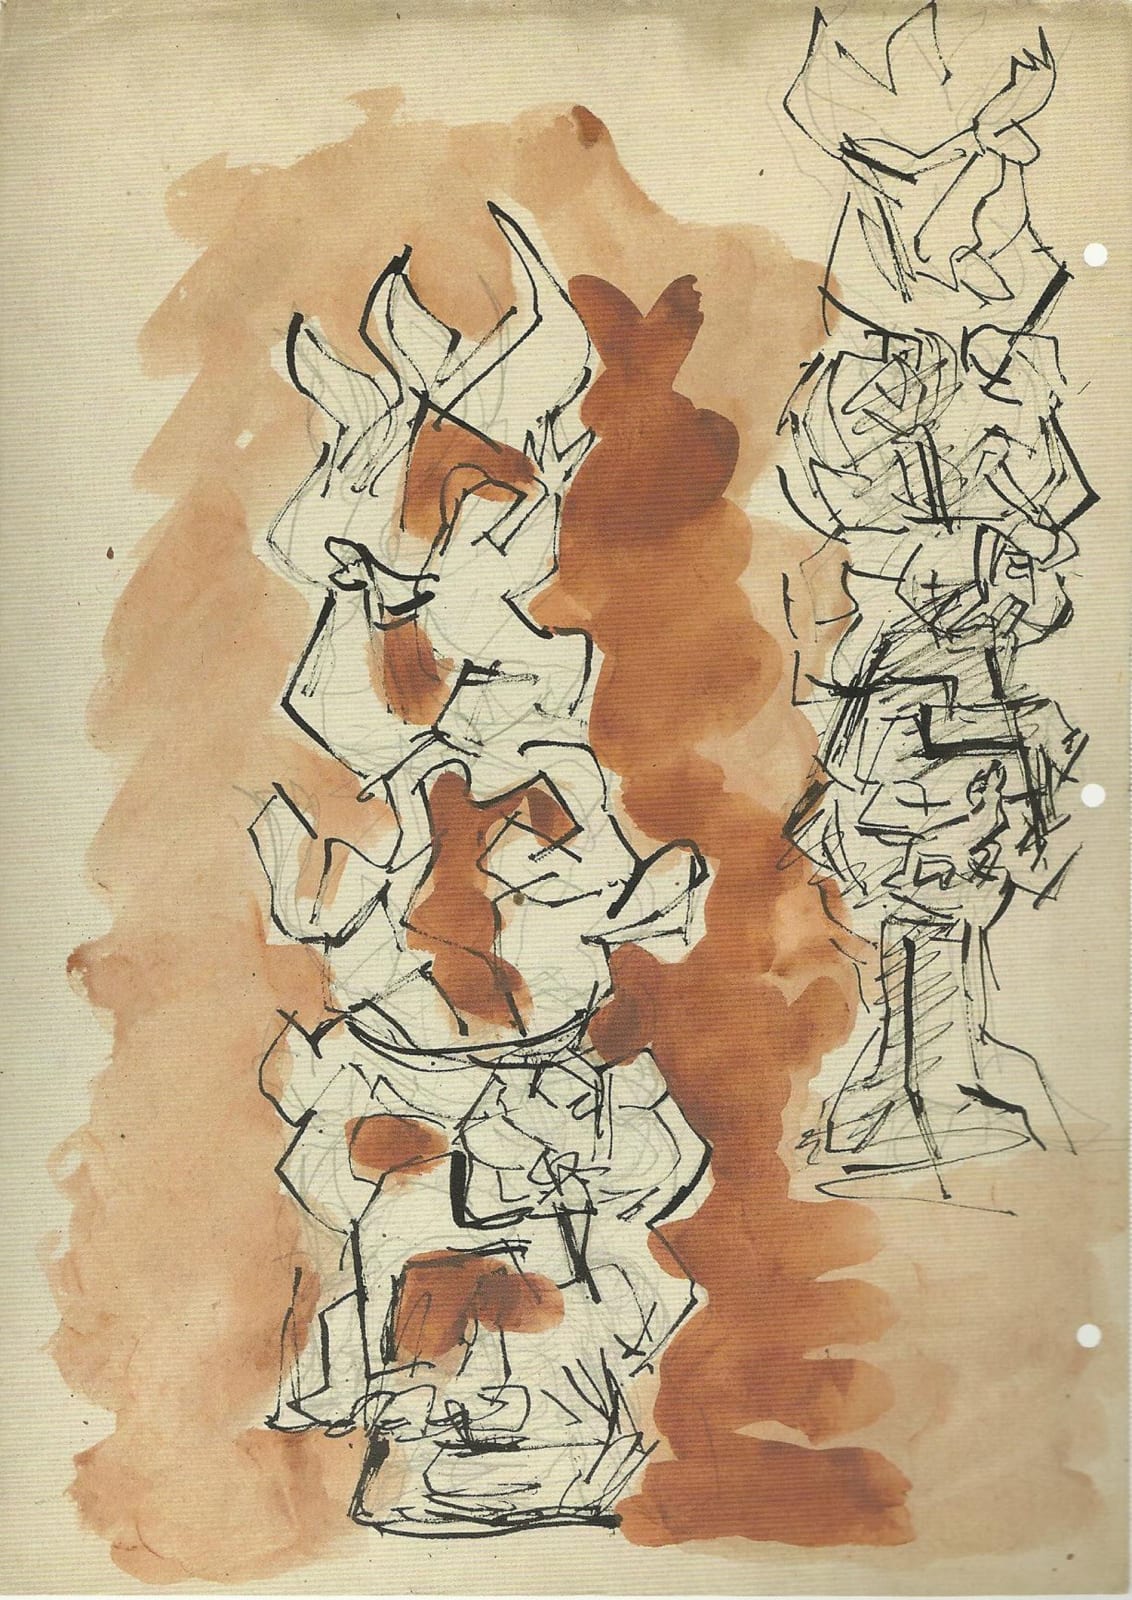 Jacques Lipchitz (1891-1973) Study for Between Heaven and Earth 1971-72 Ink and wash on paper 43 × 31 cm Ben Uri Collection © Jacques Lipchitz estate To see and discover more about this artist click here